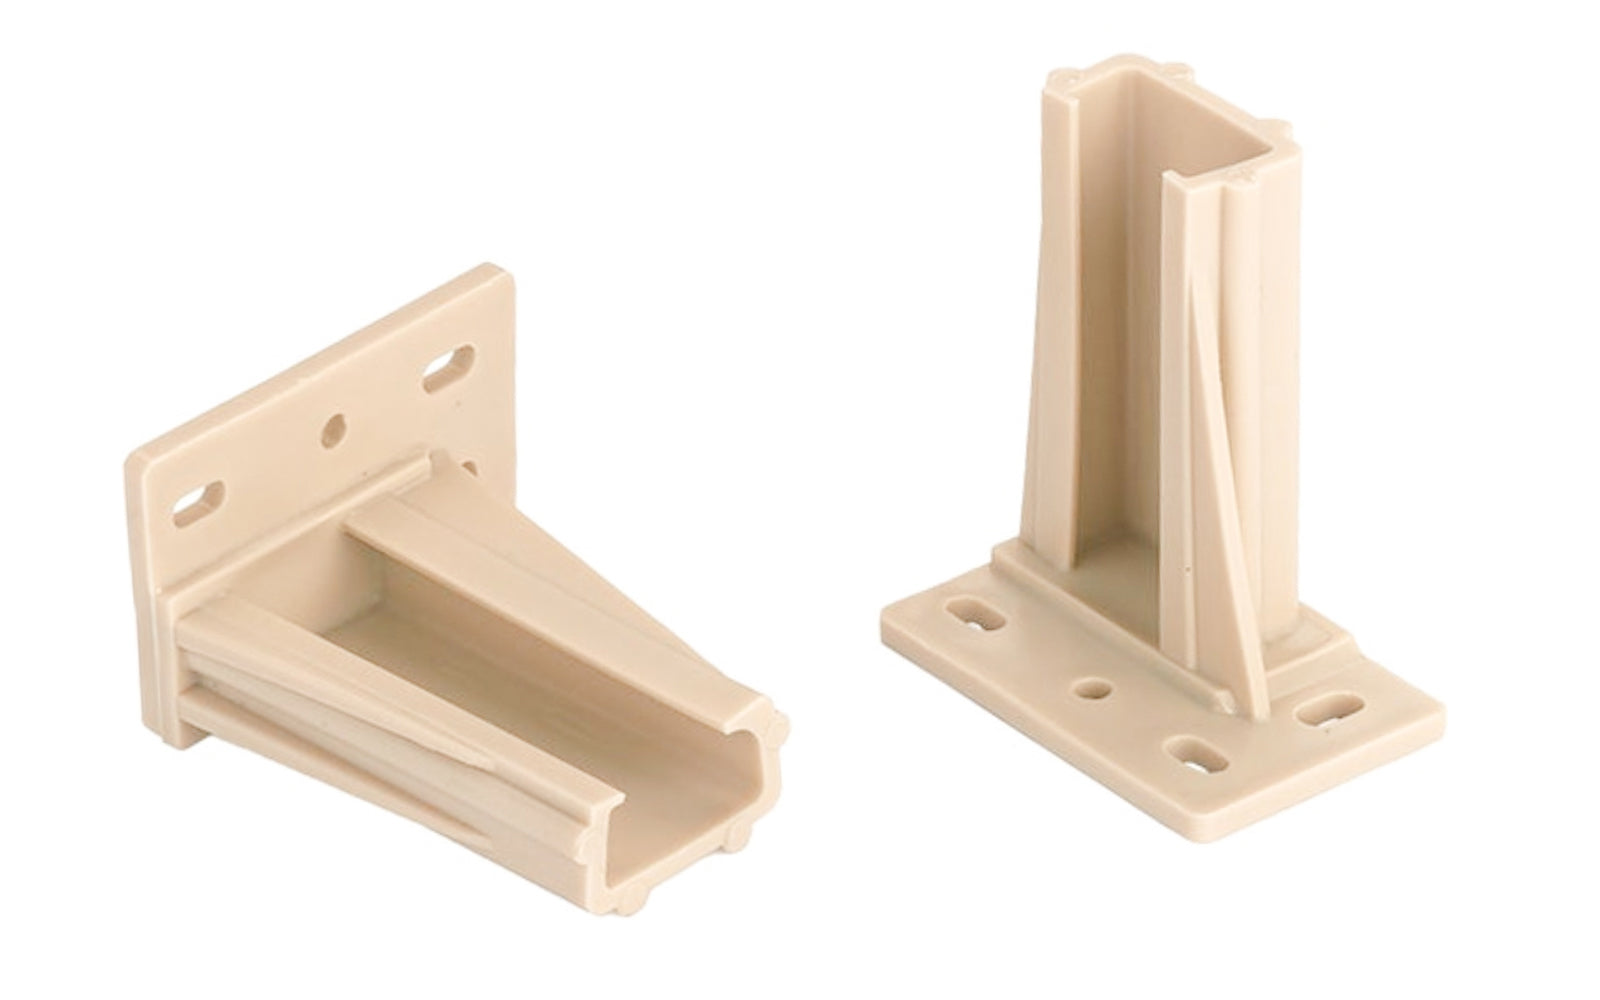 KV Plastic Drawer Slide Mounting Bracket - 2 Pack. Rear mounting drawer slide bracket for face frame application simplifies installation. Product has a left & right handed unit. Sold as a pair. Made by Knape & Vogt. Sold as a 2 pieces in a bag. Model 1805-101P. 029274345297